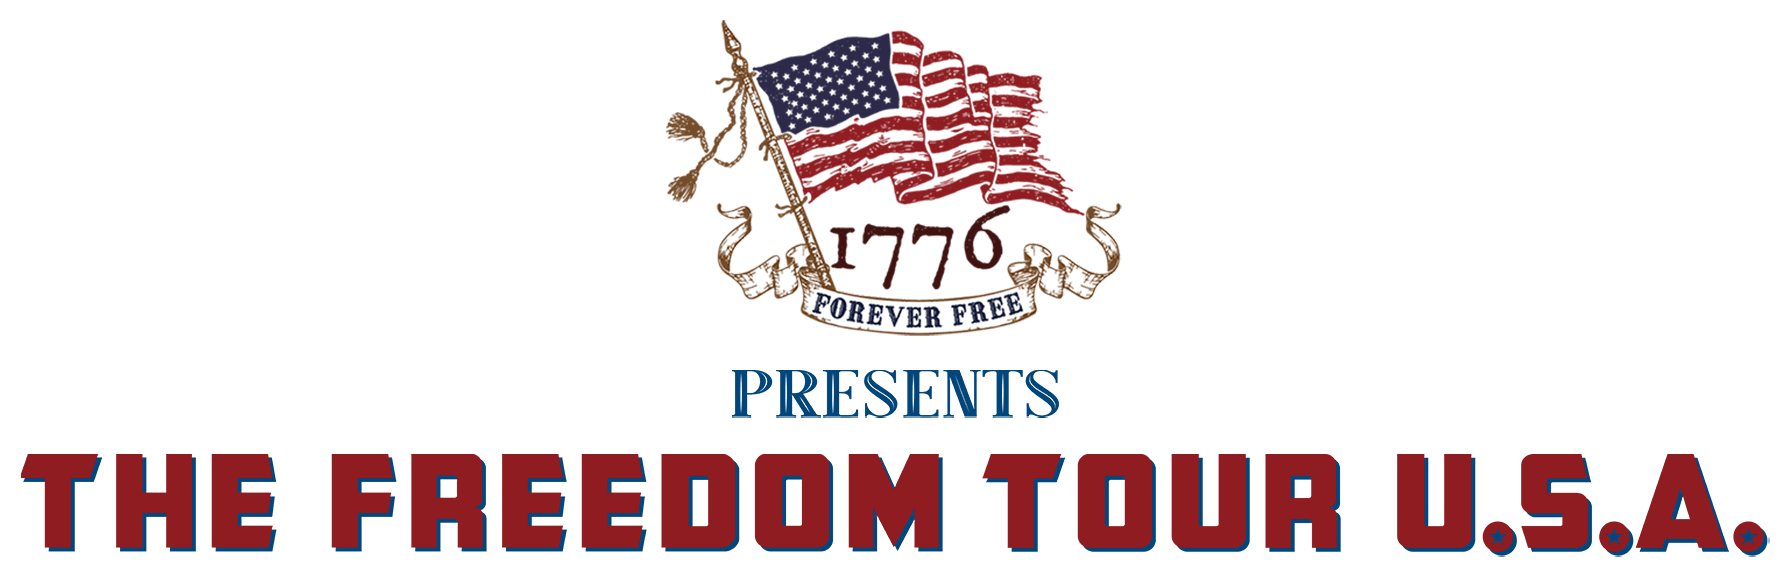 the-freedom-tour-slider-banner-graphics-for-homepage-min.png